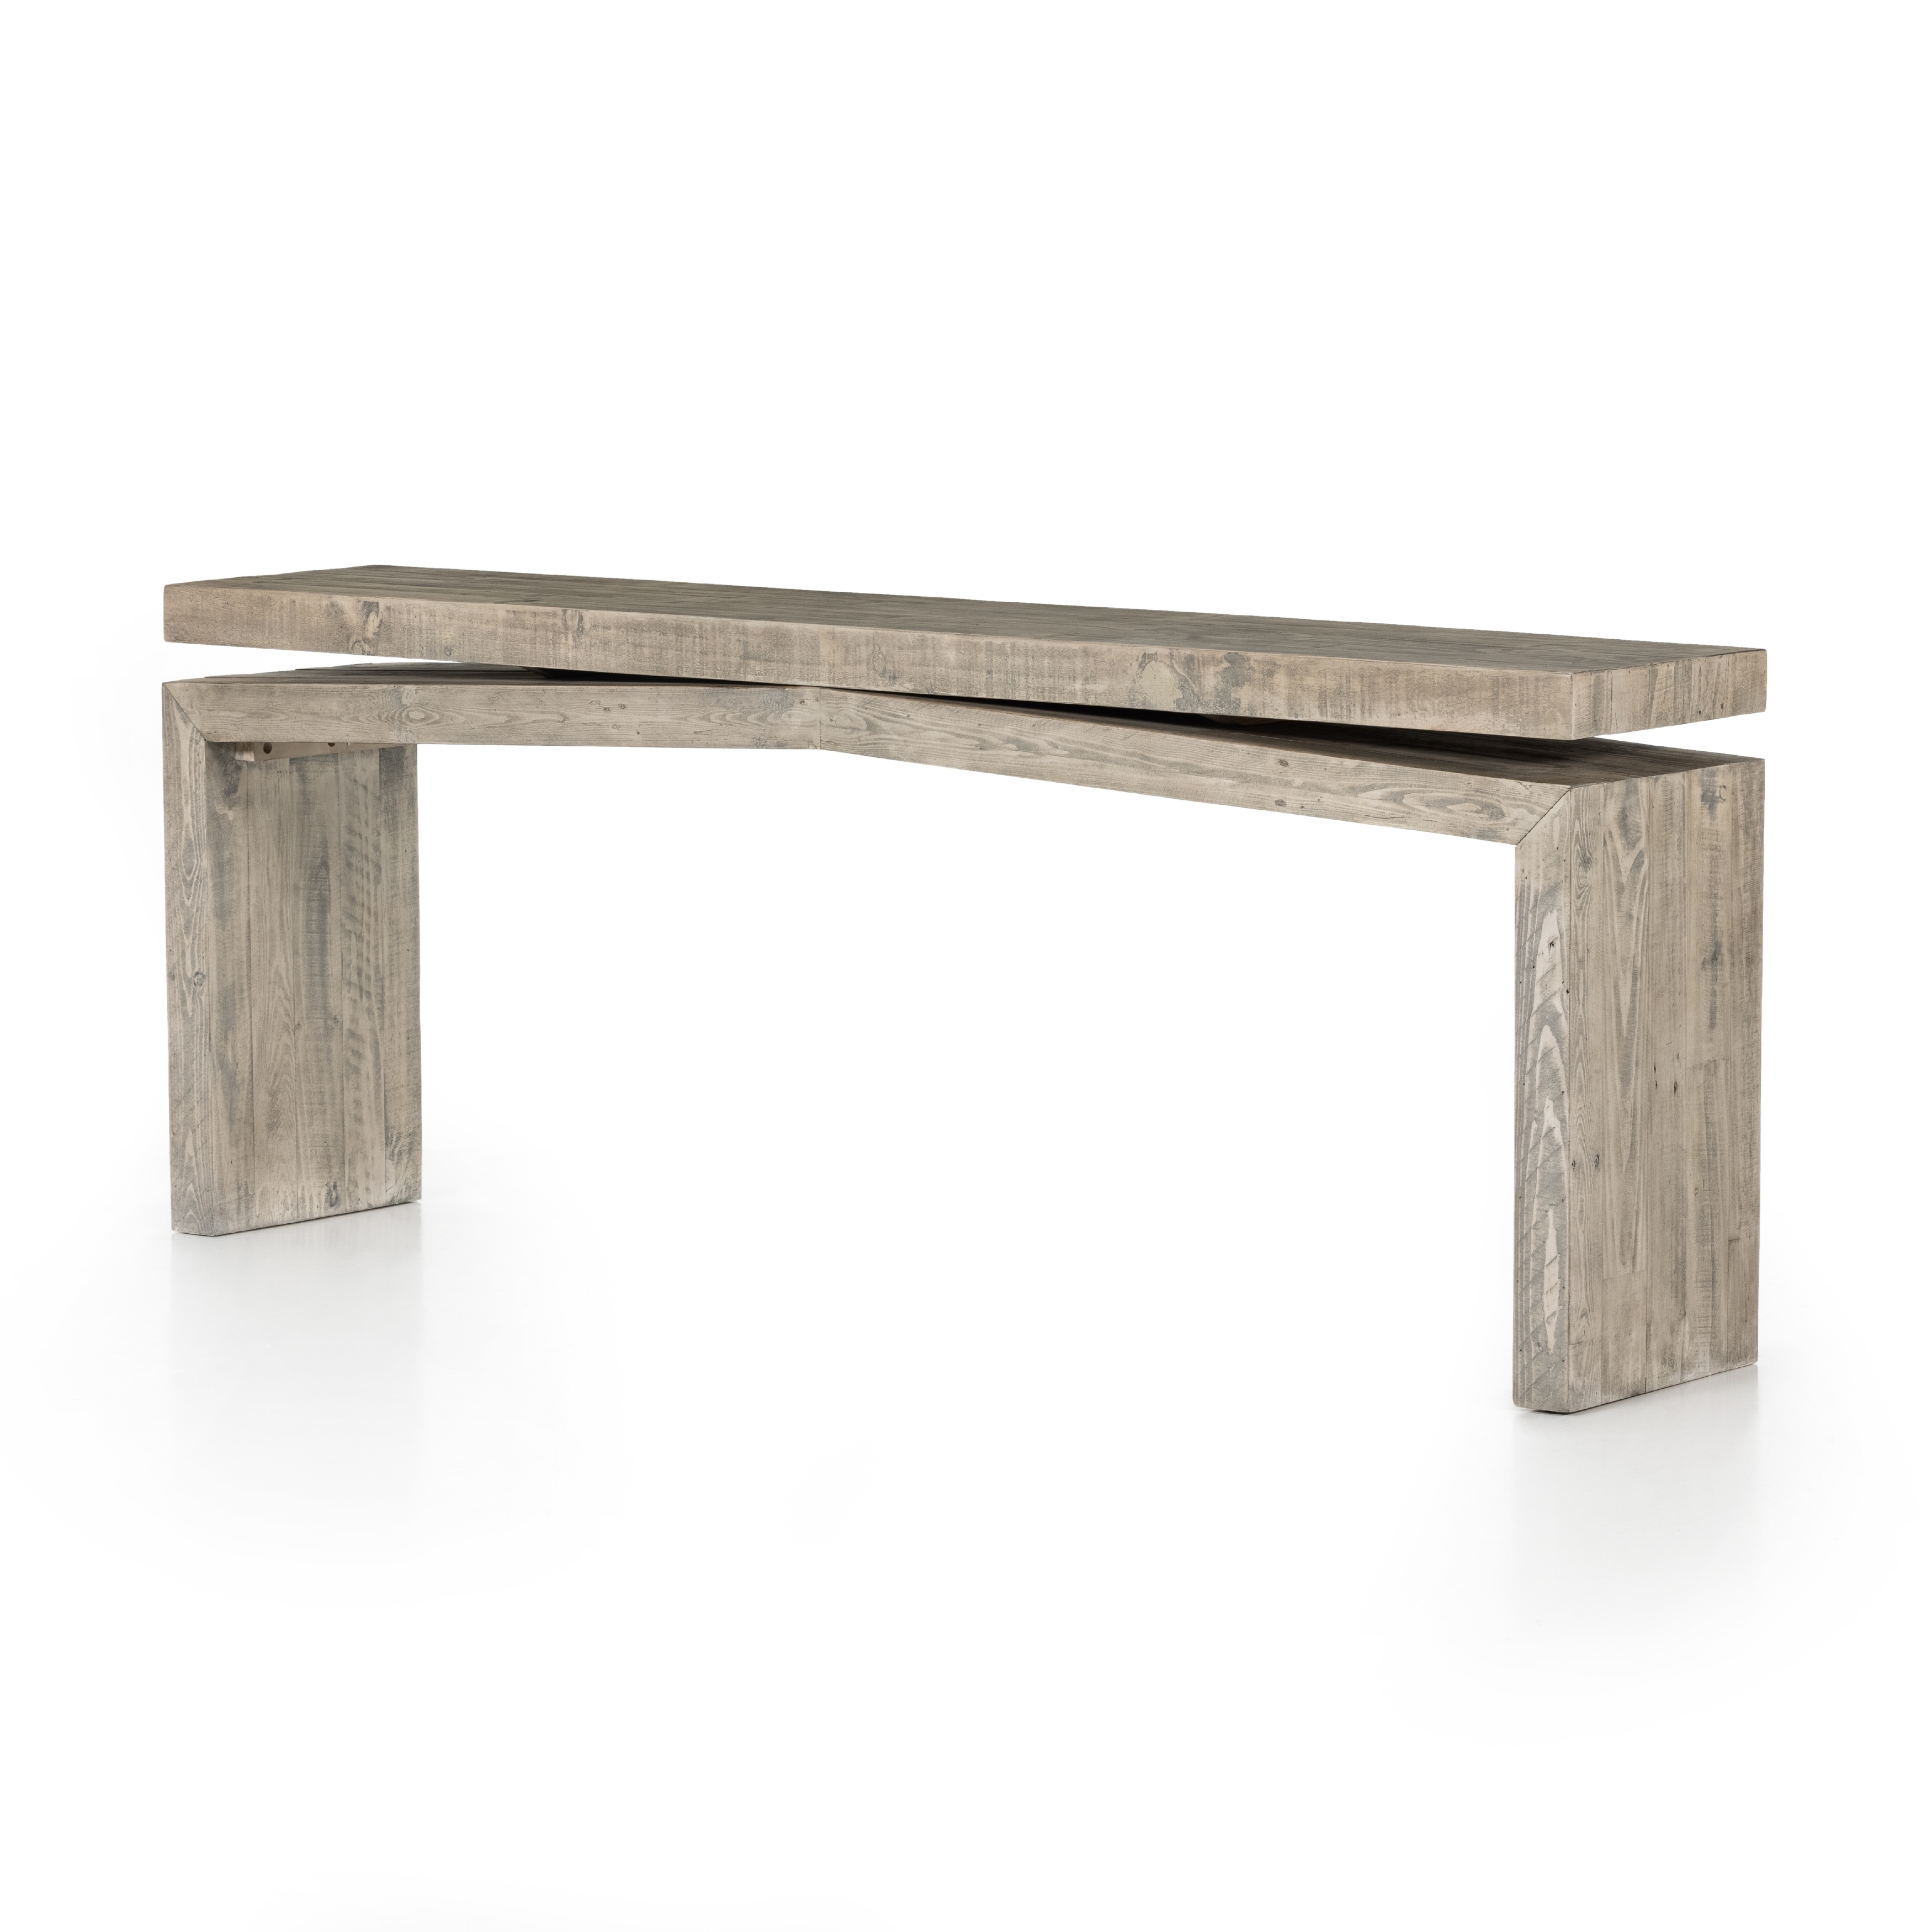 Matthes Console Table-Weathered Wheat - Image 0